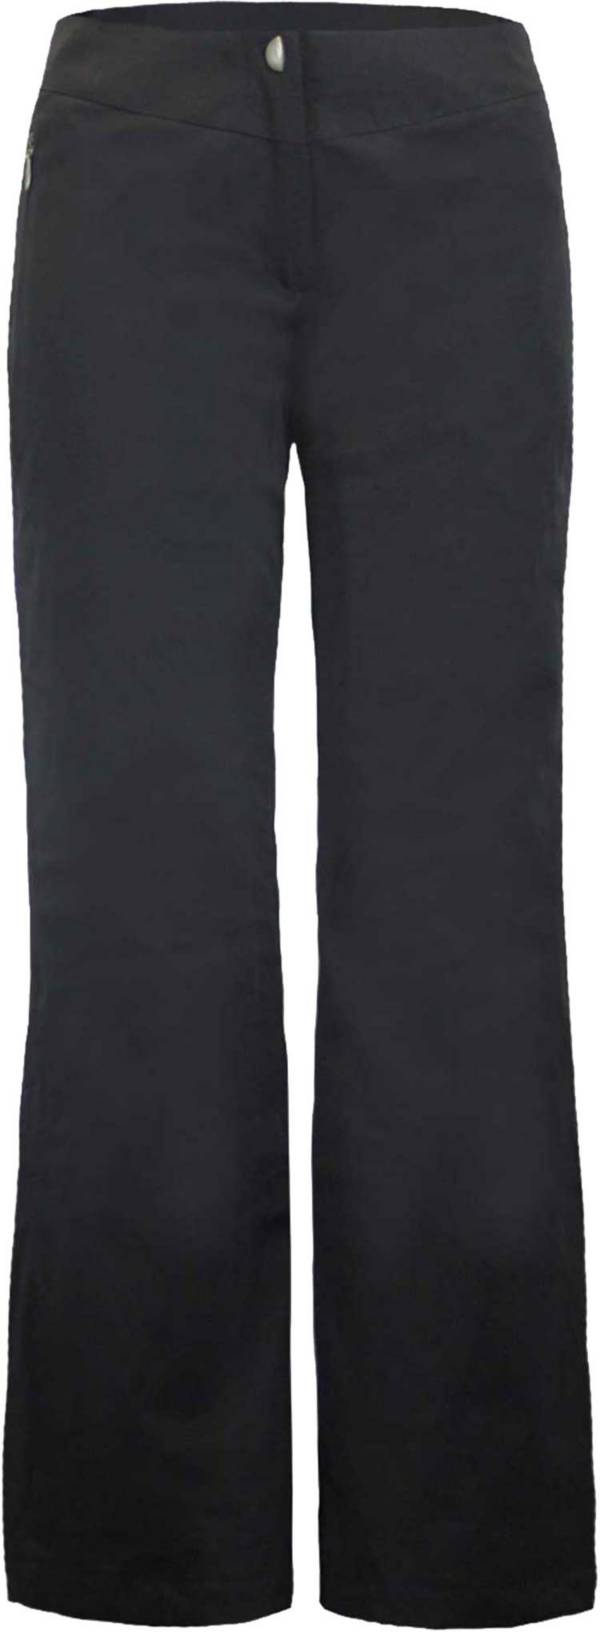 Outdoor Gear Women's Cruise Insulated Pants product image